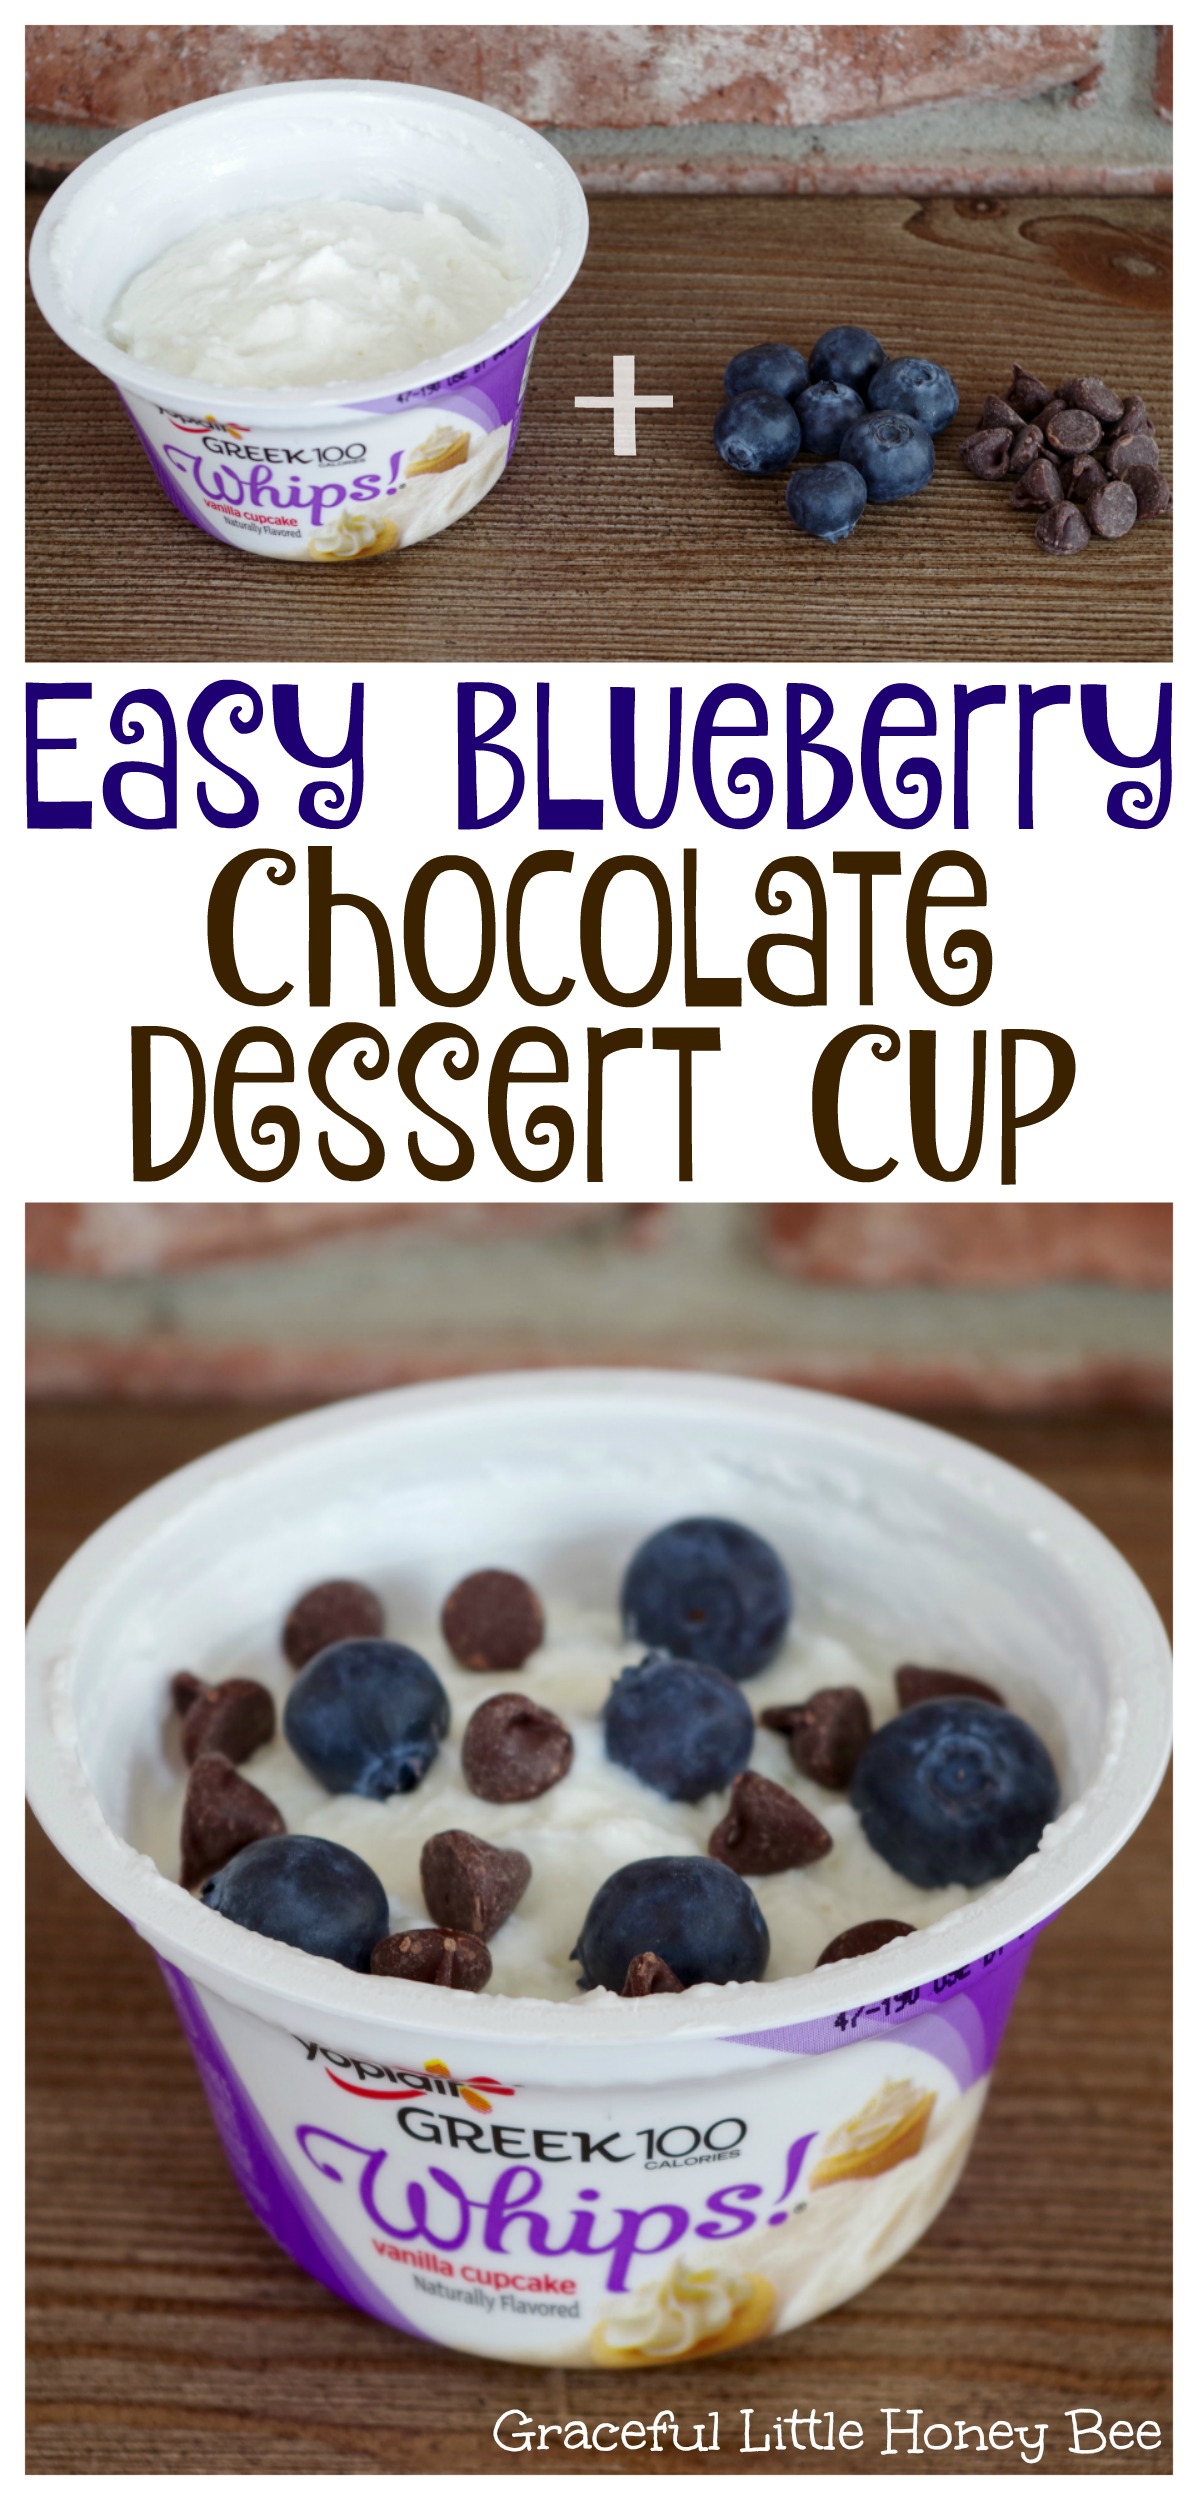 Make this easy and delicious Blueberry Chocolate Dessert Cup when you need something sweet! #ad